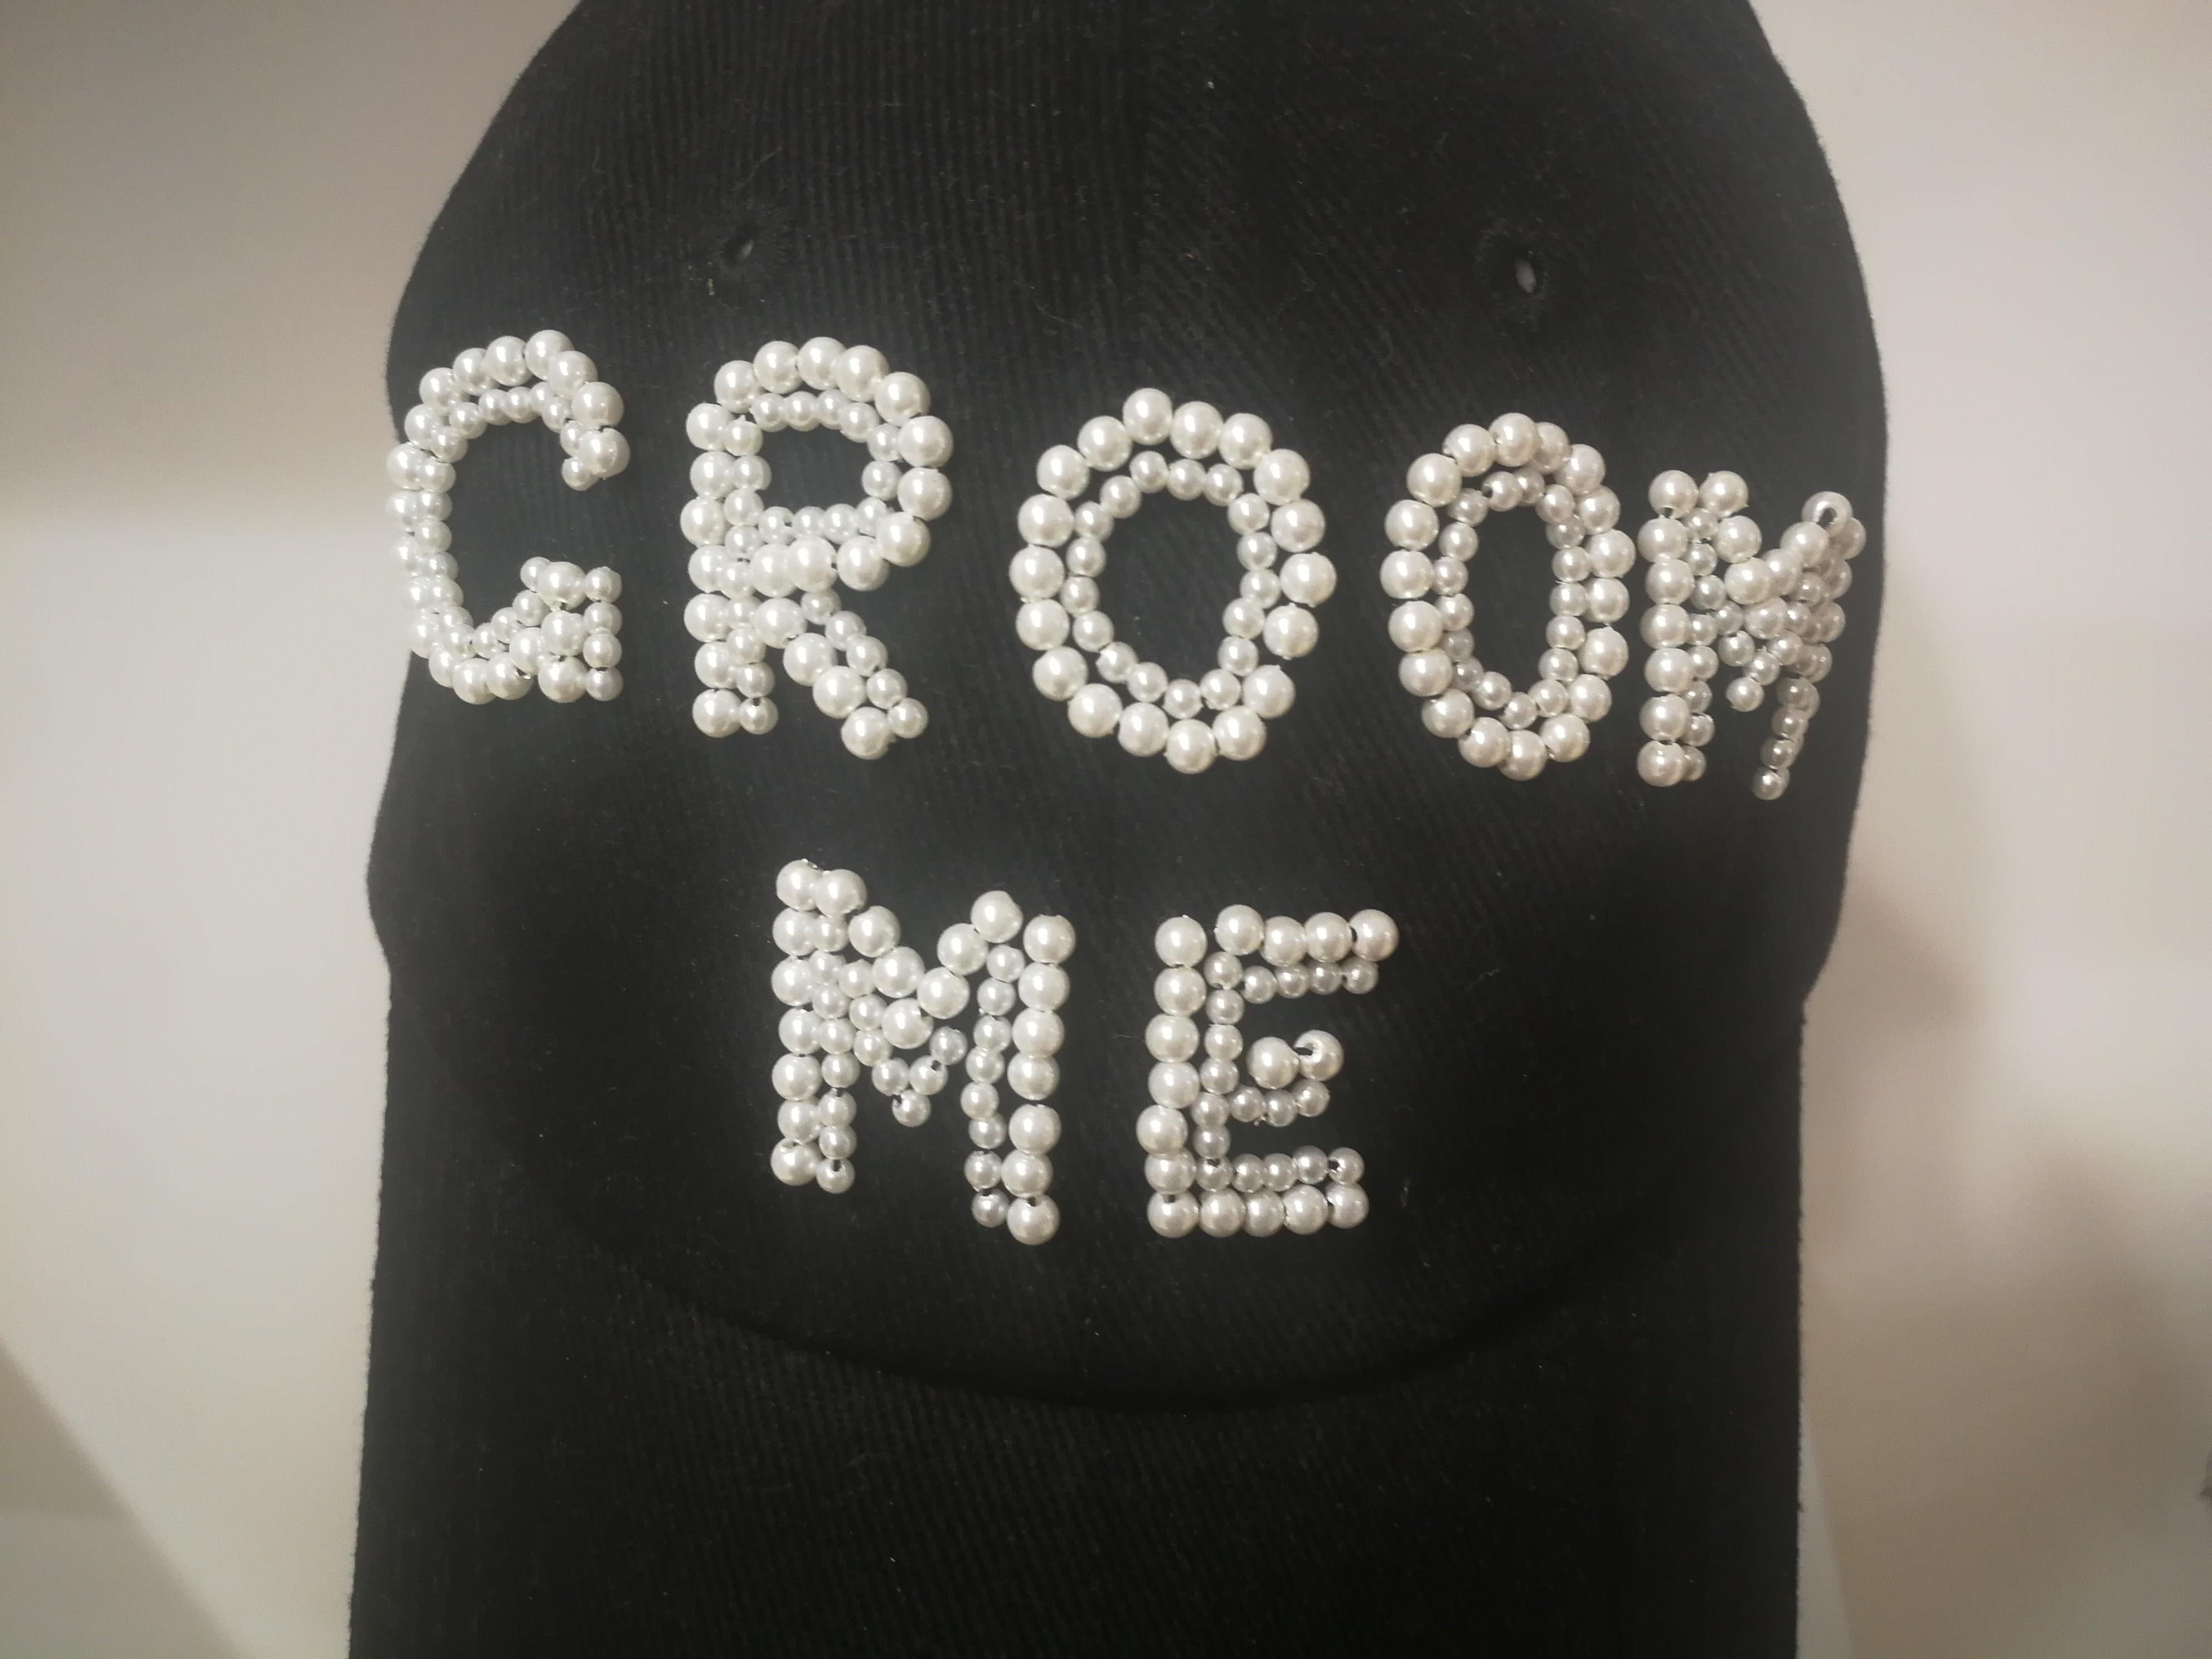 Laurence and Chico Black Groom Me Hat / Cap
Embellished with white pearls